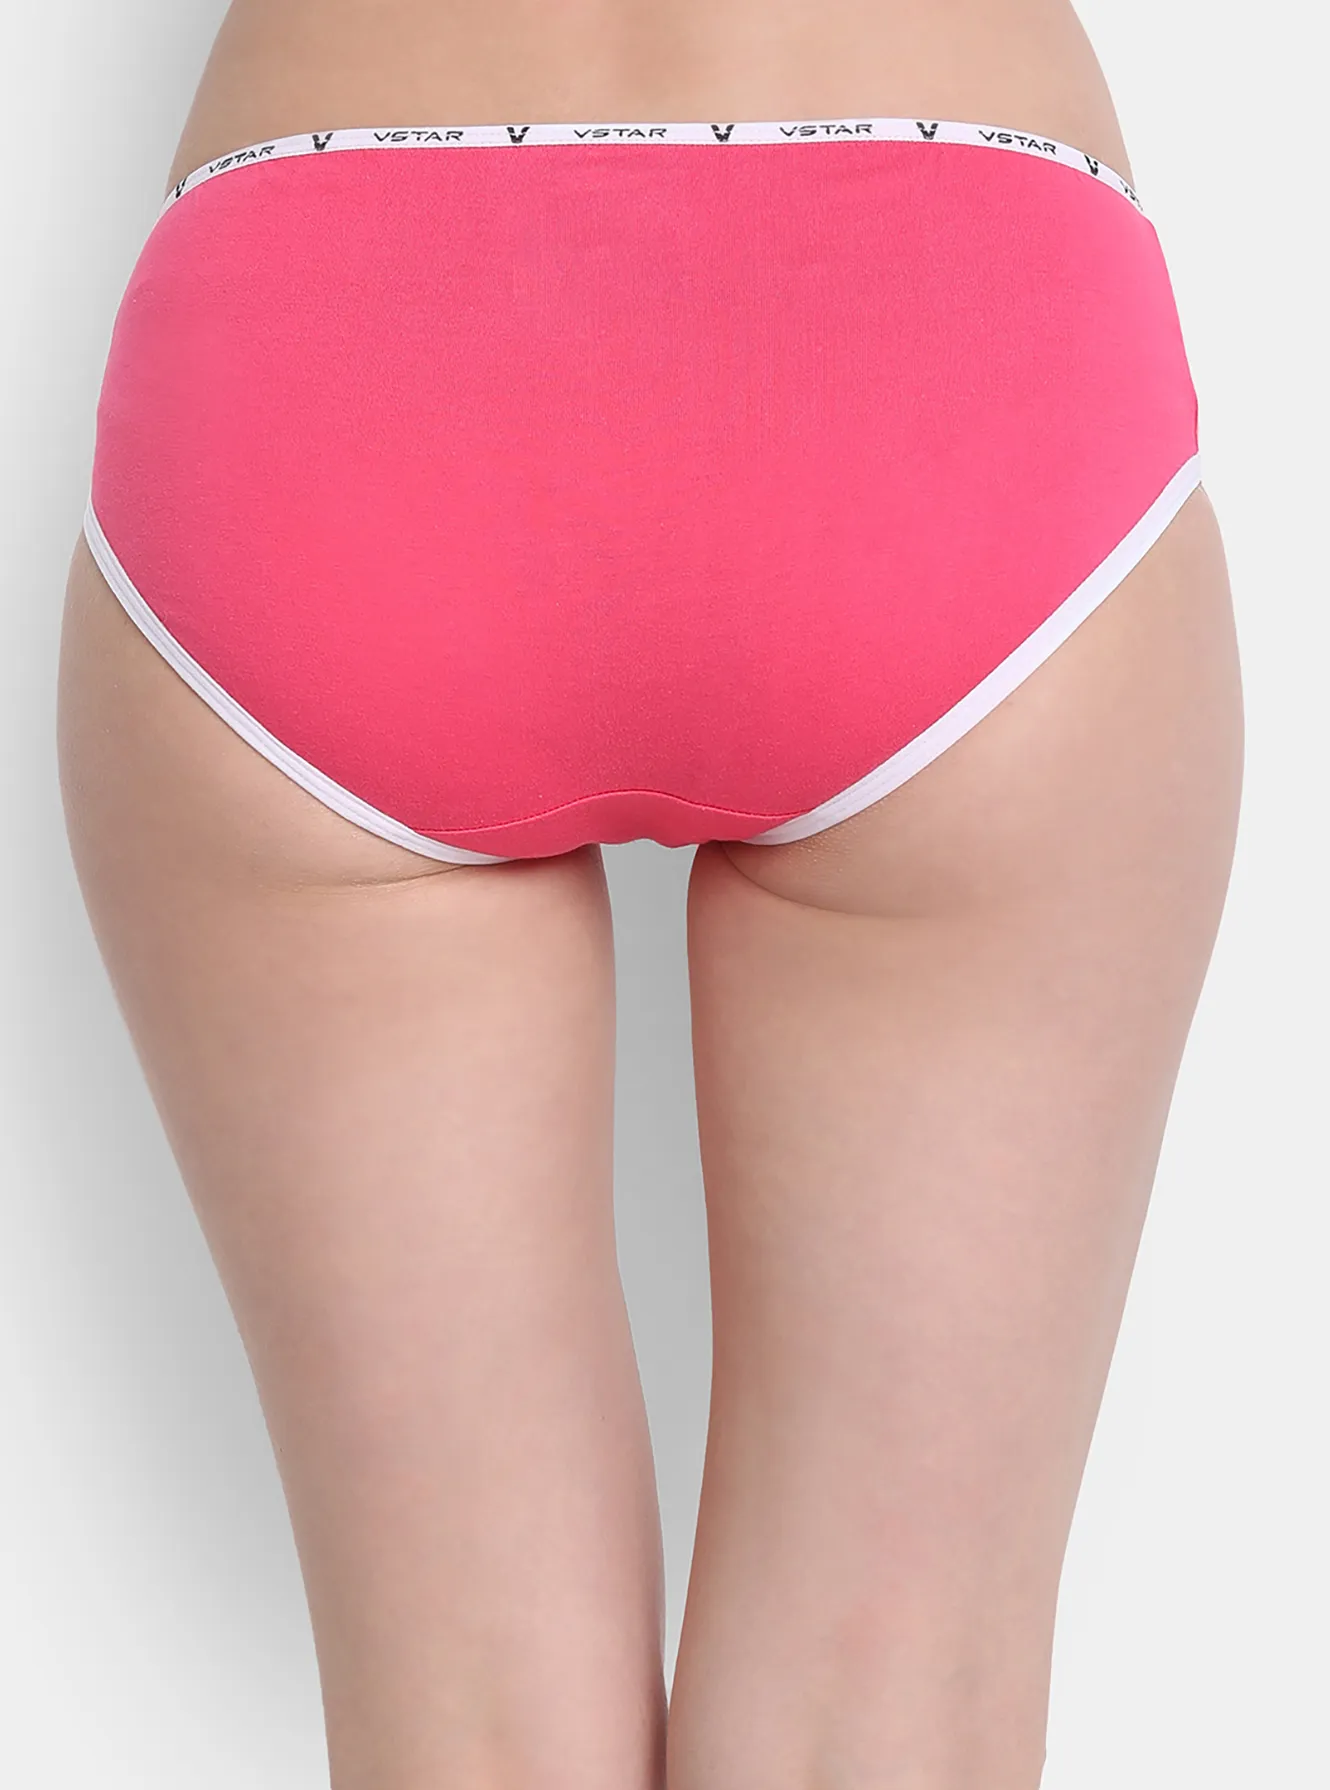 Mid rise hipster cut panty with contrast elasticated waistband